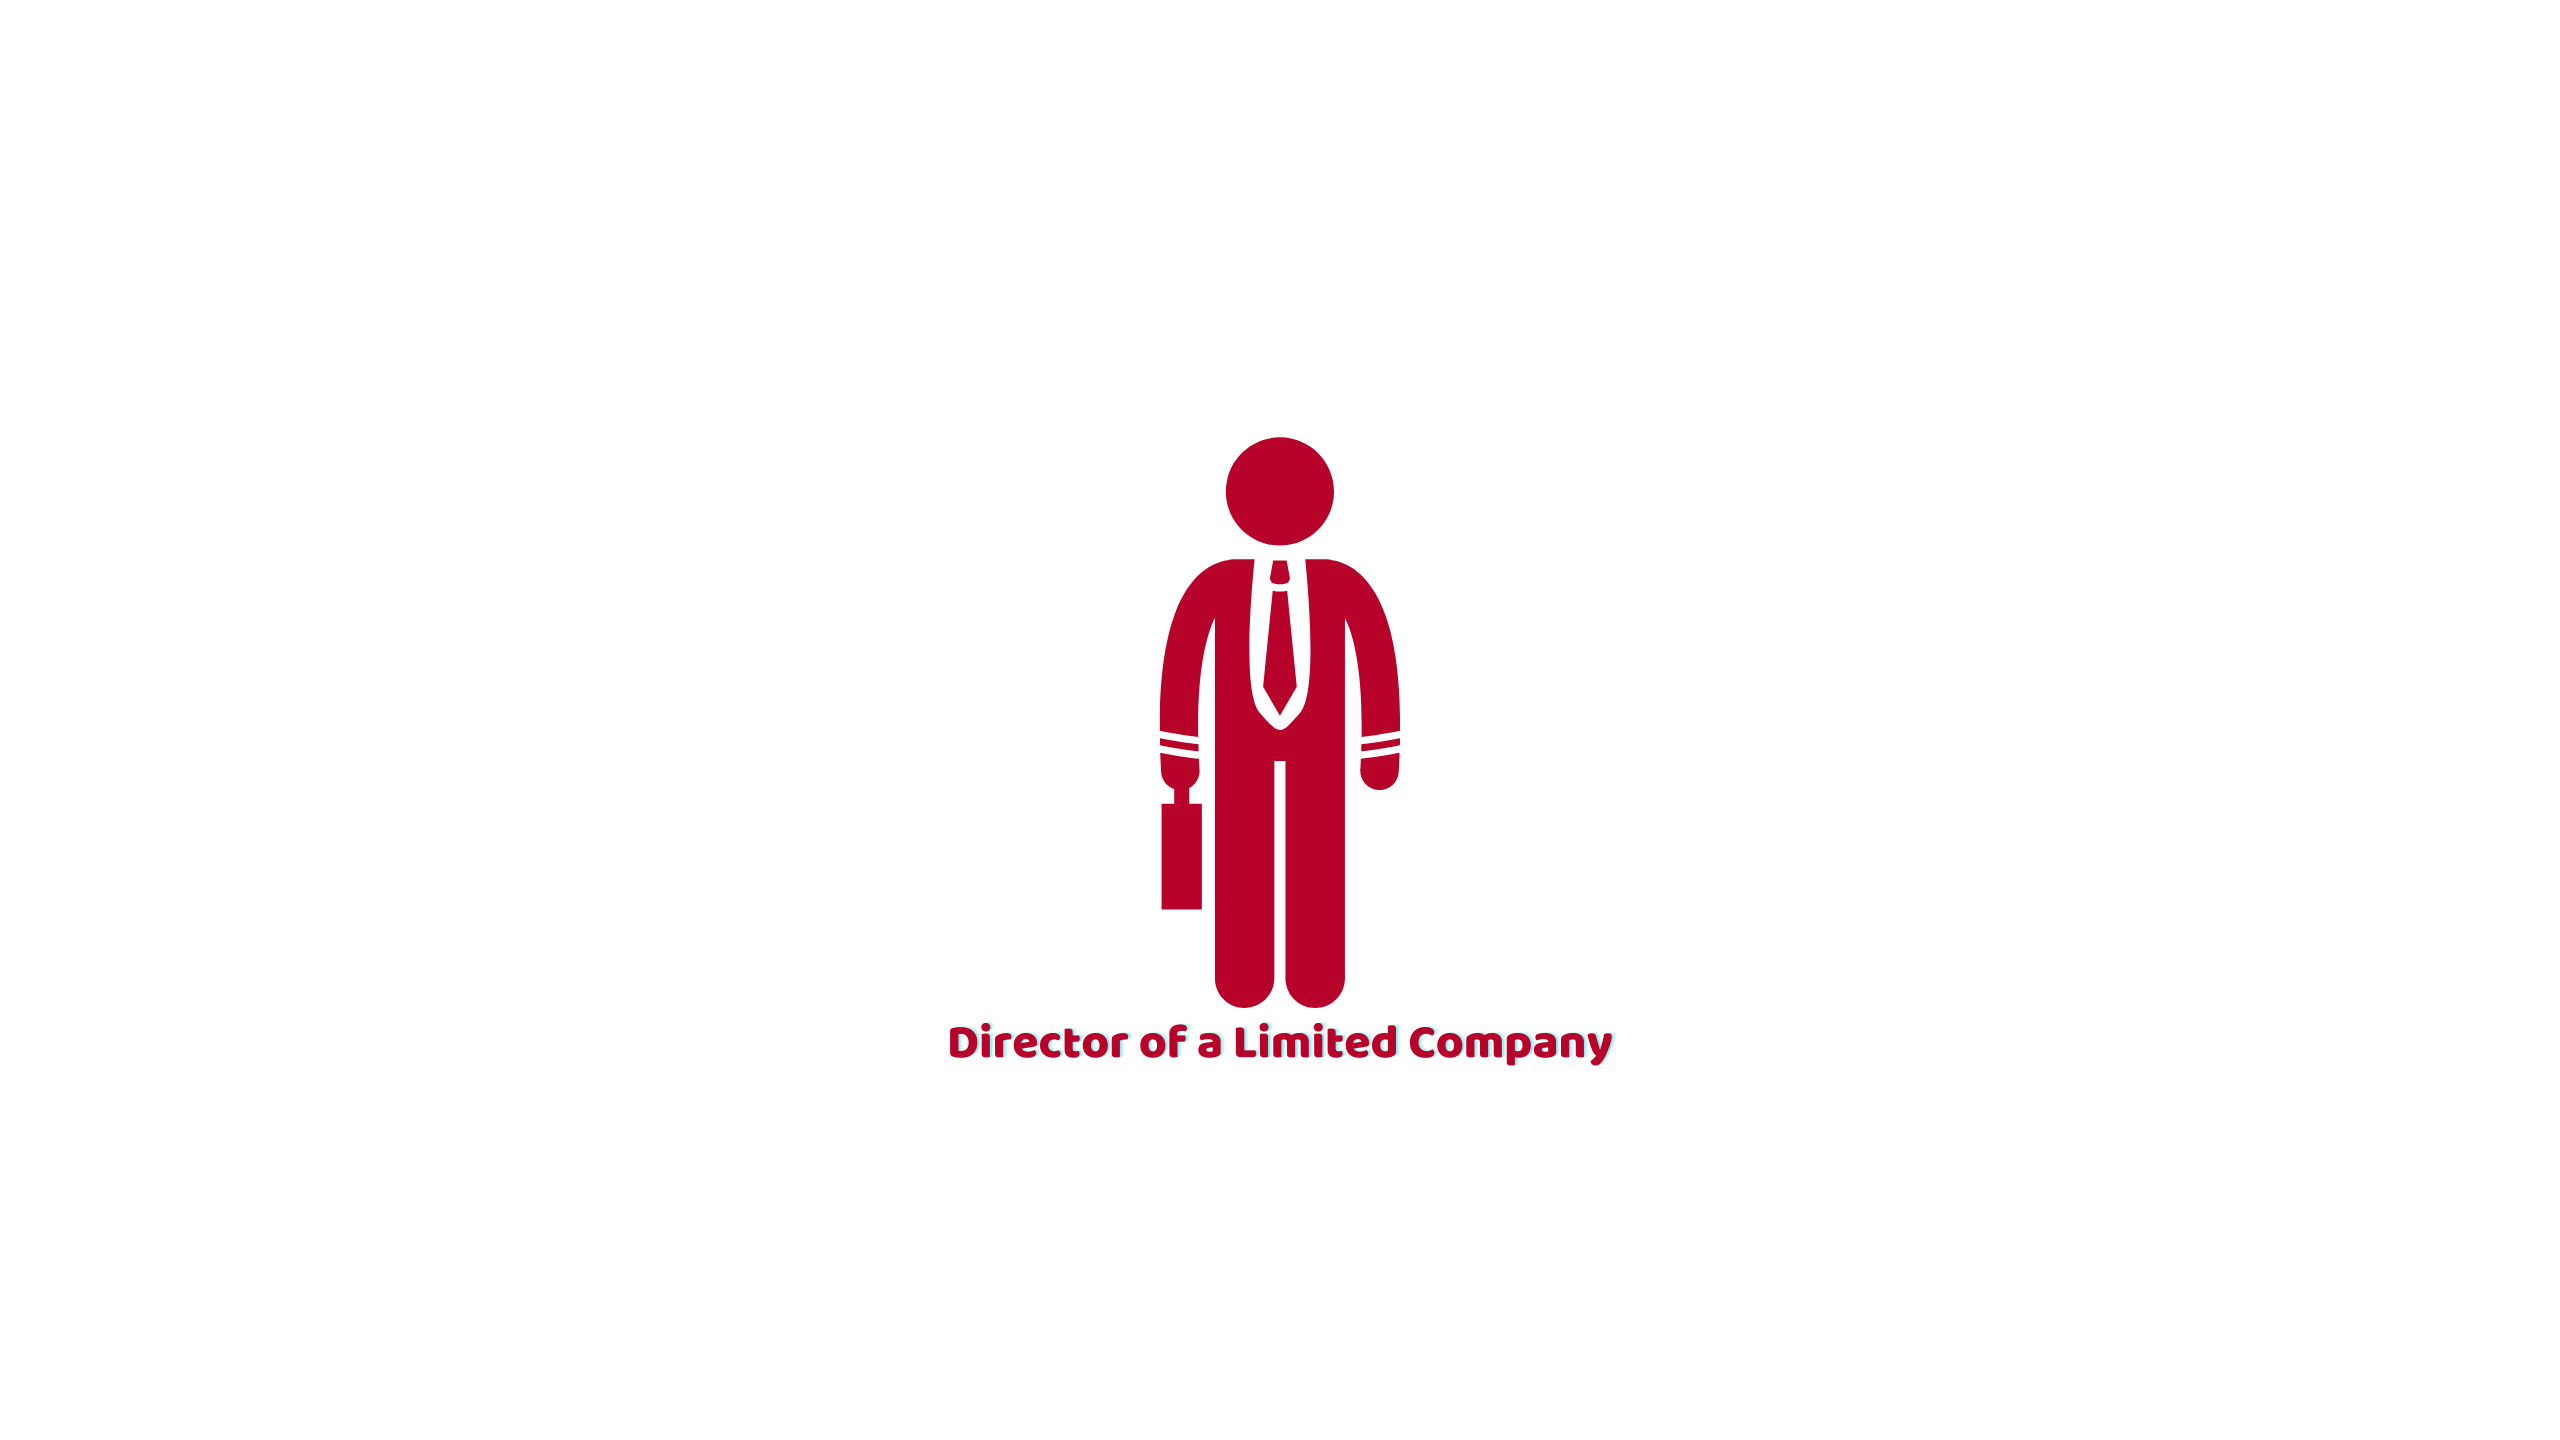 Director of a Limited Company